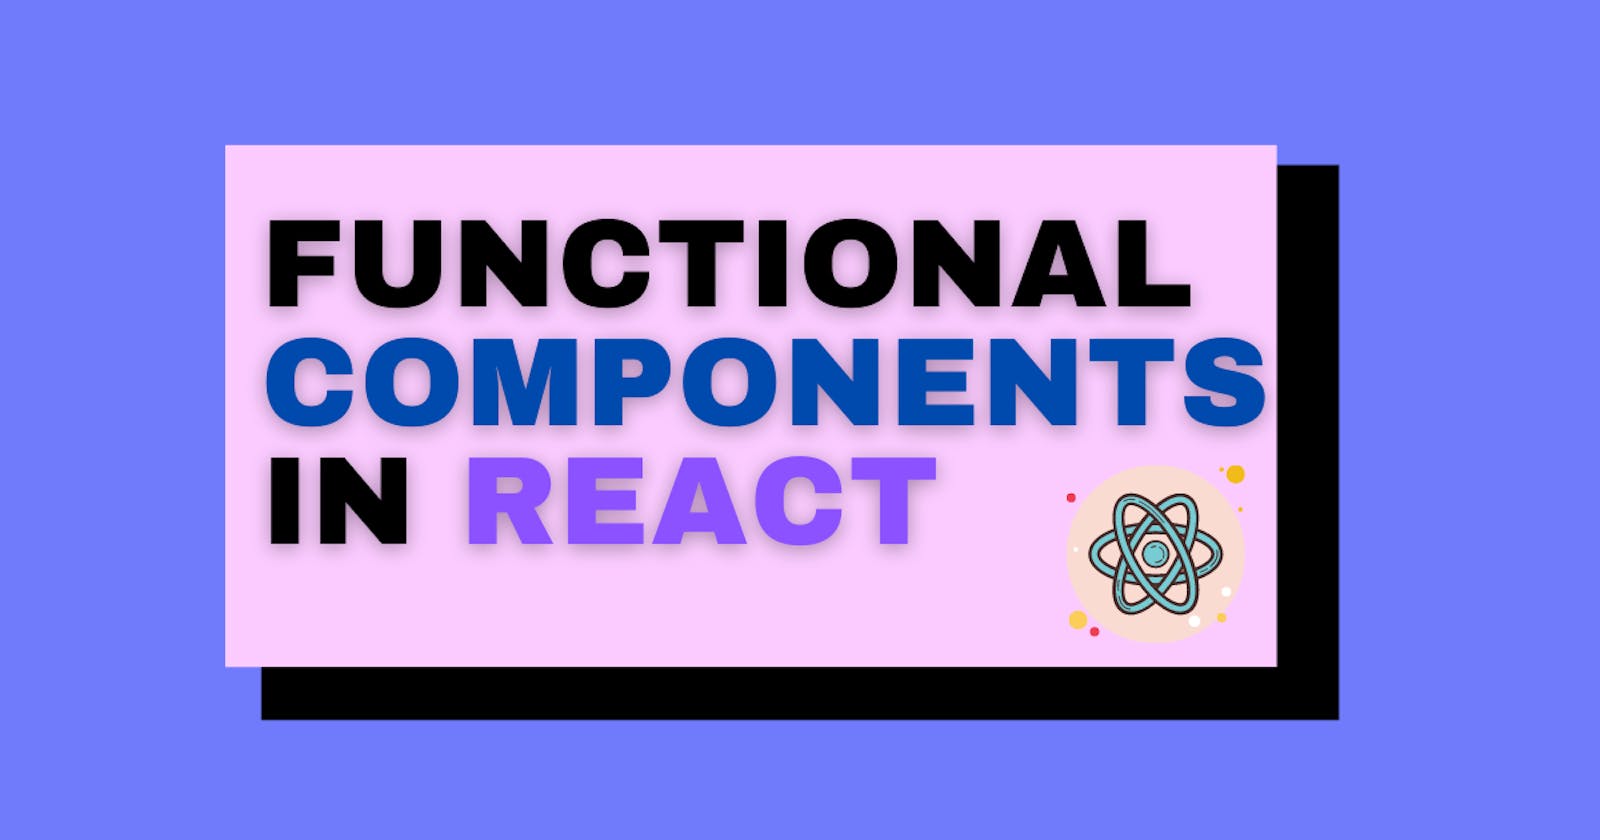 What are React functional components?